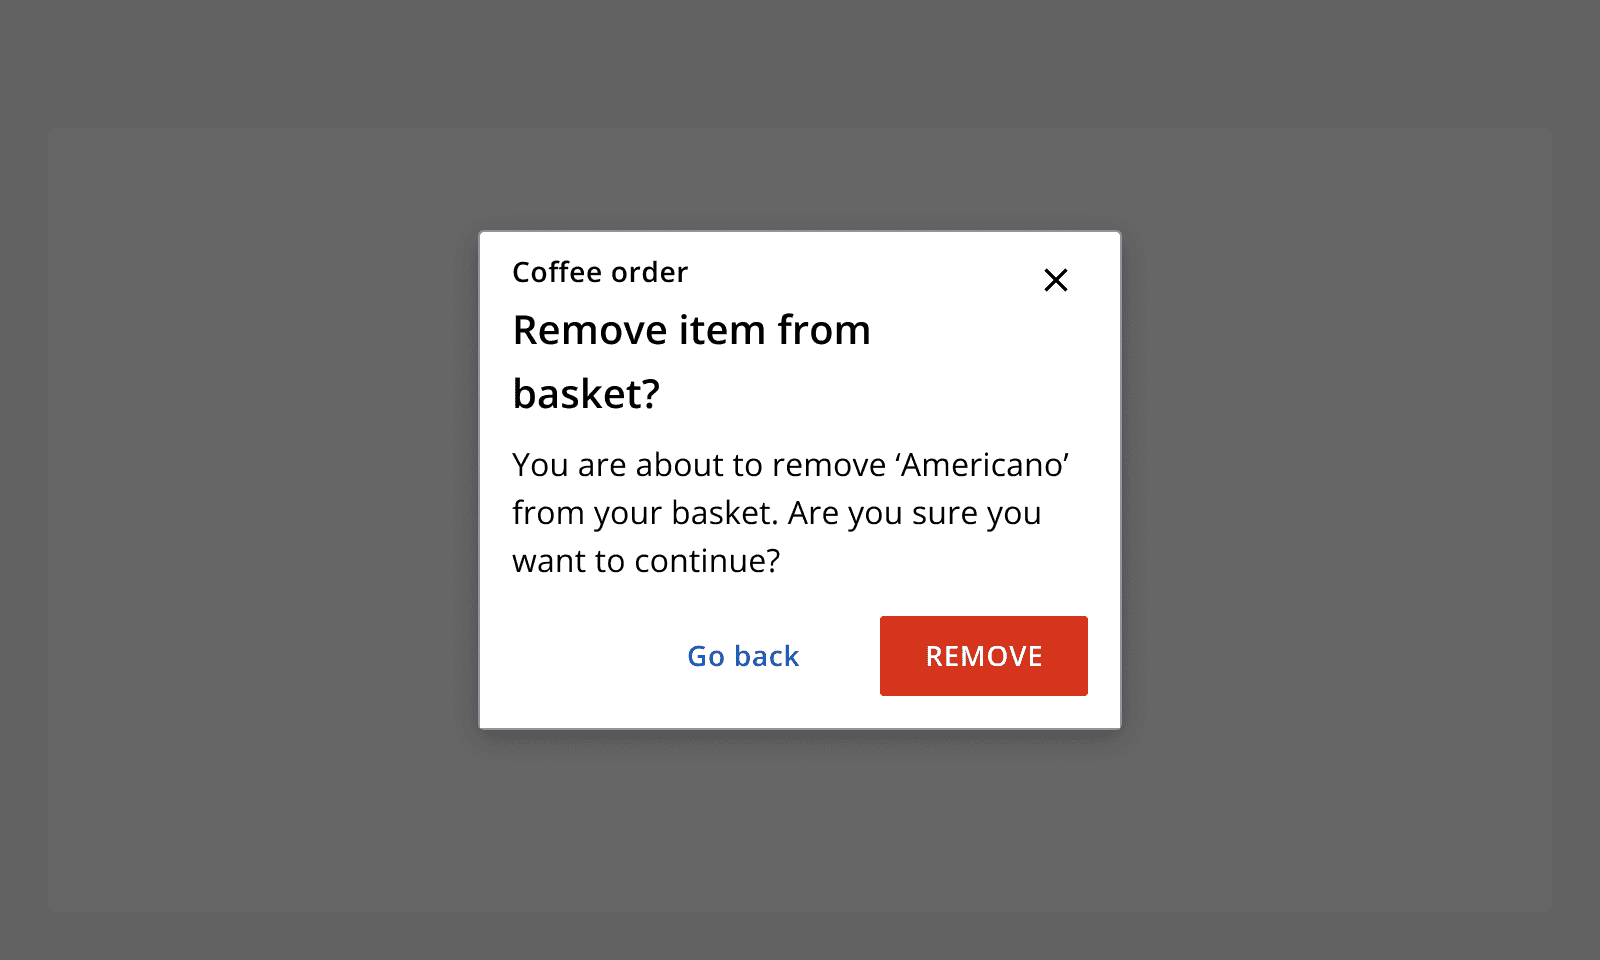 An example dialog for removing an item from a basket. It provides a destructive action button for 'Remove' and a secondary button for 'Go back'.